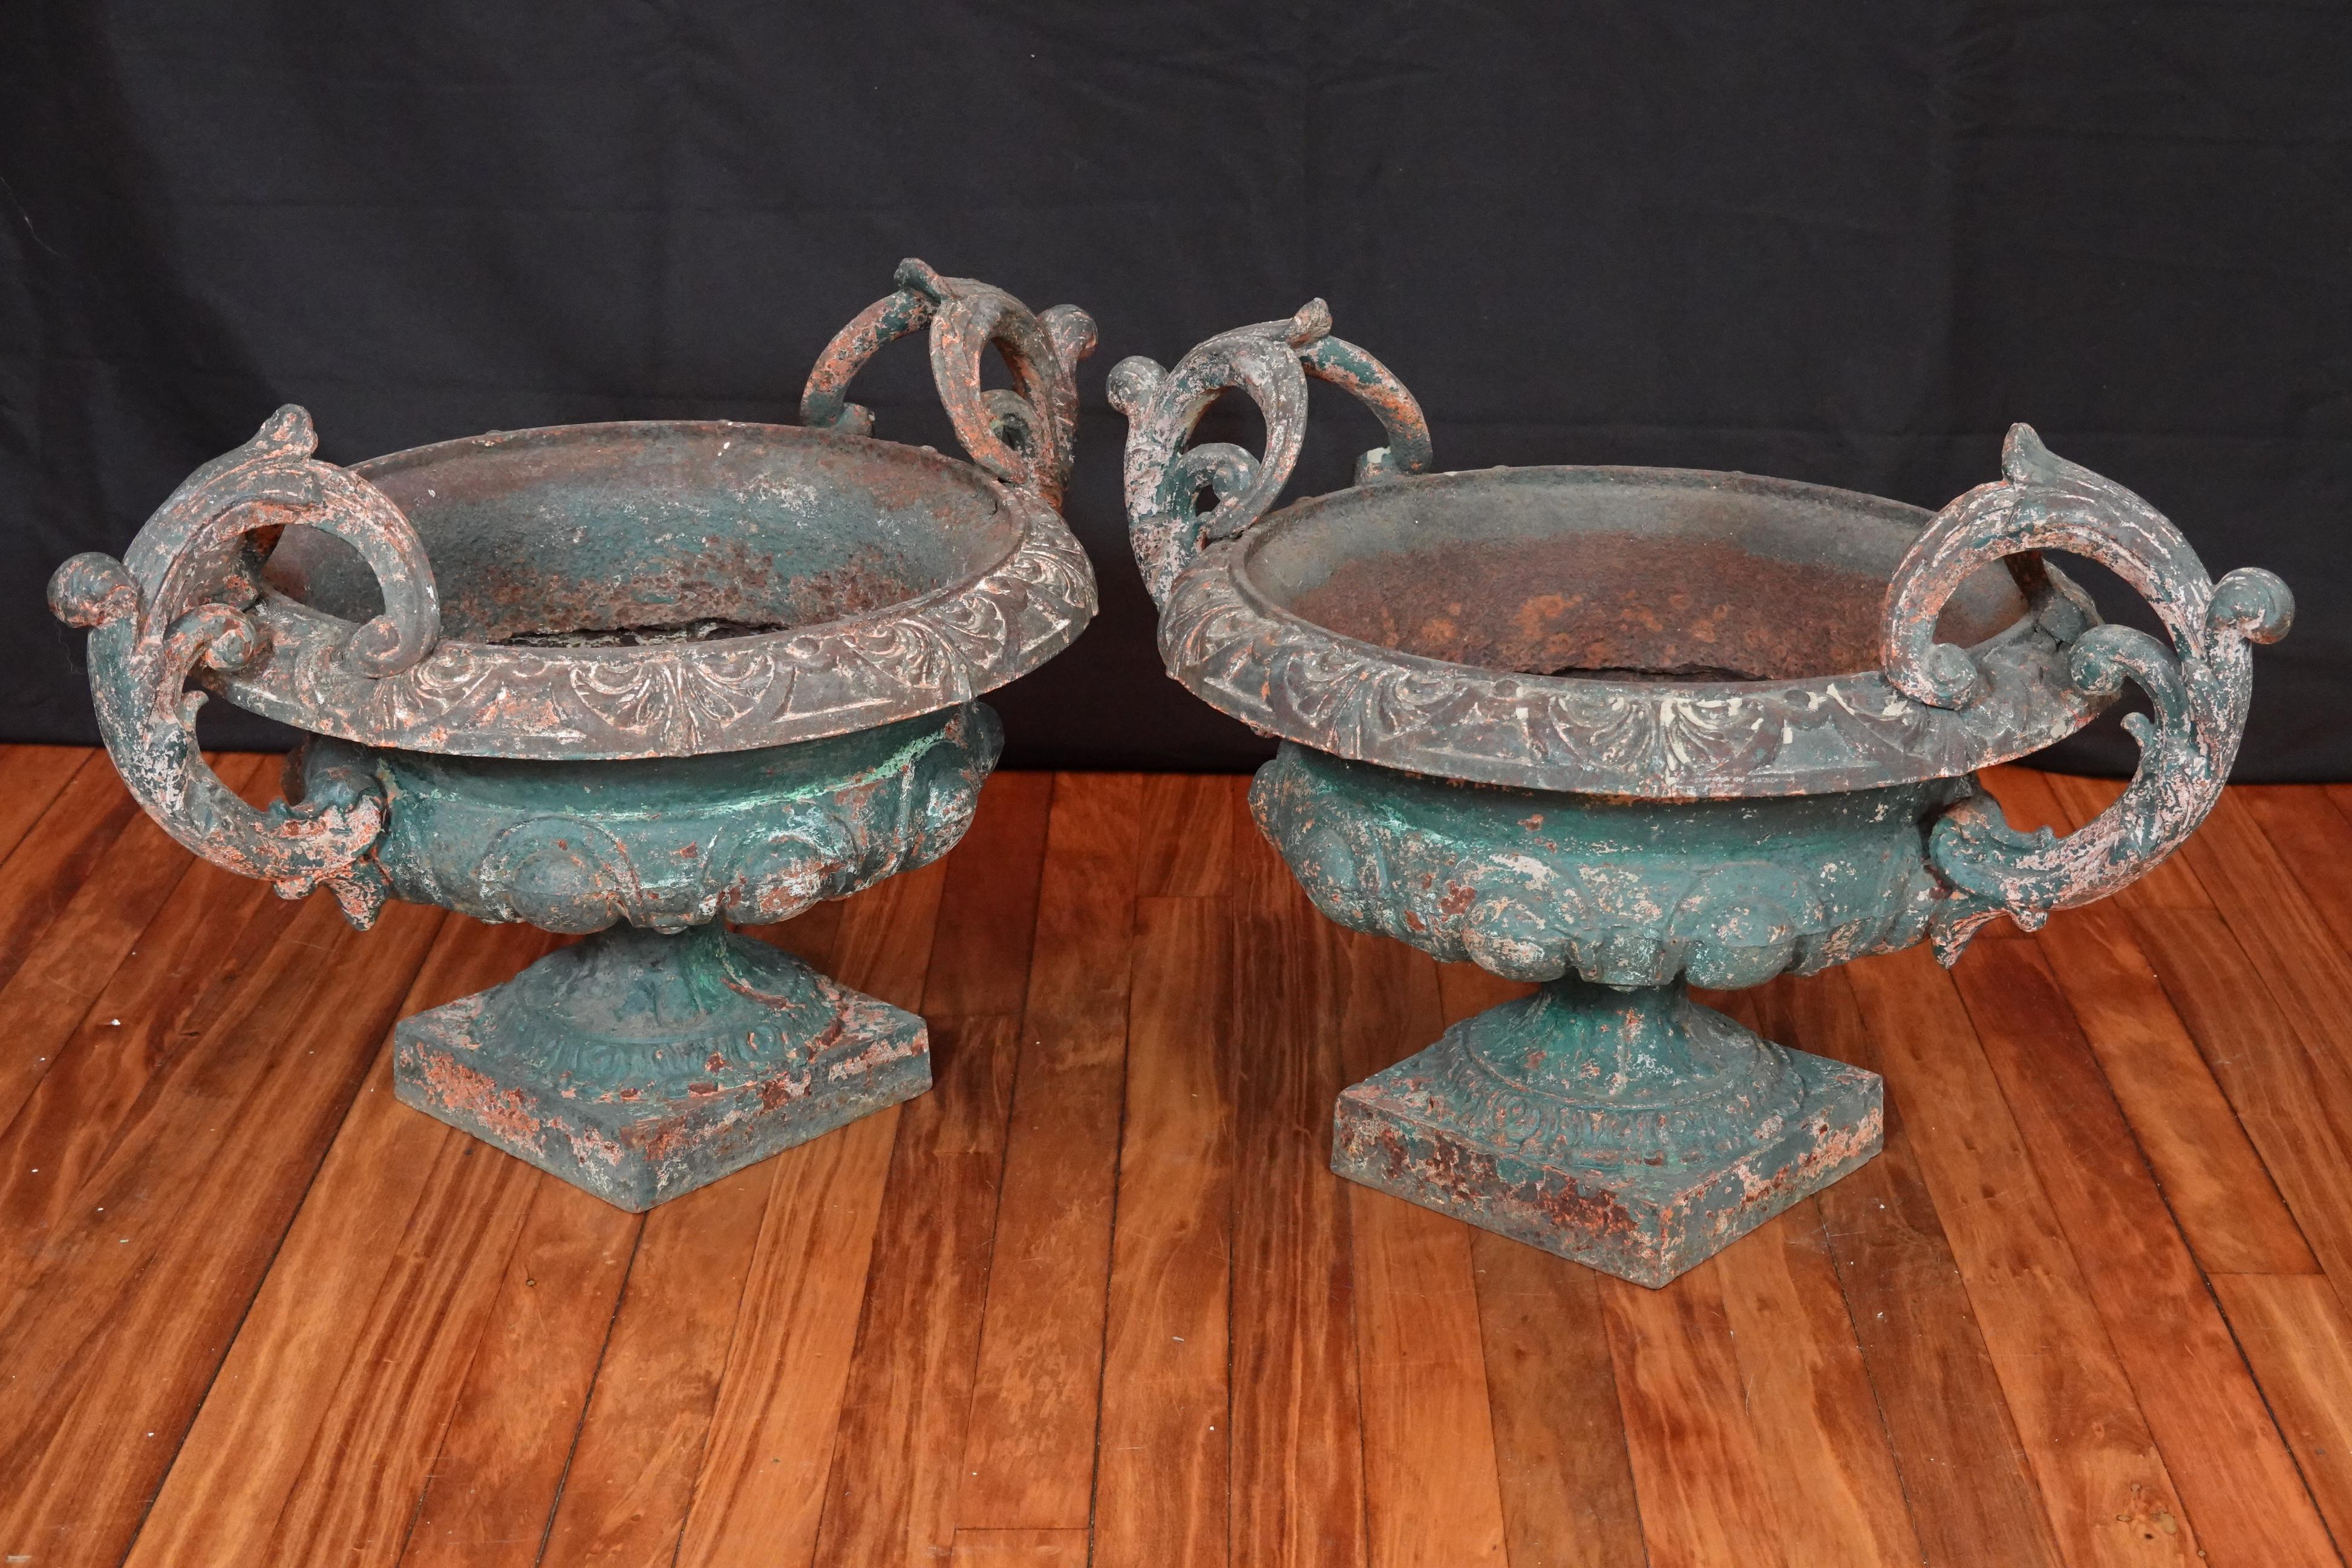 Pair of French 19th century cast iron garden urns with handles. The urns having chipping green paint that add to their beauty.